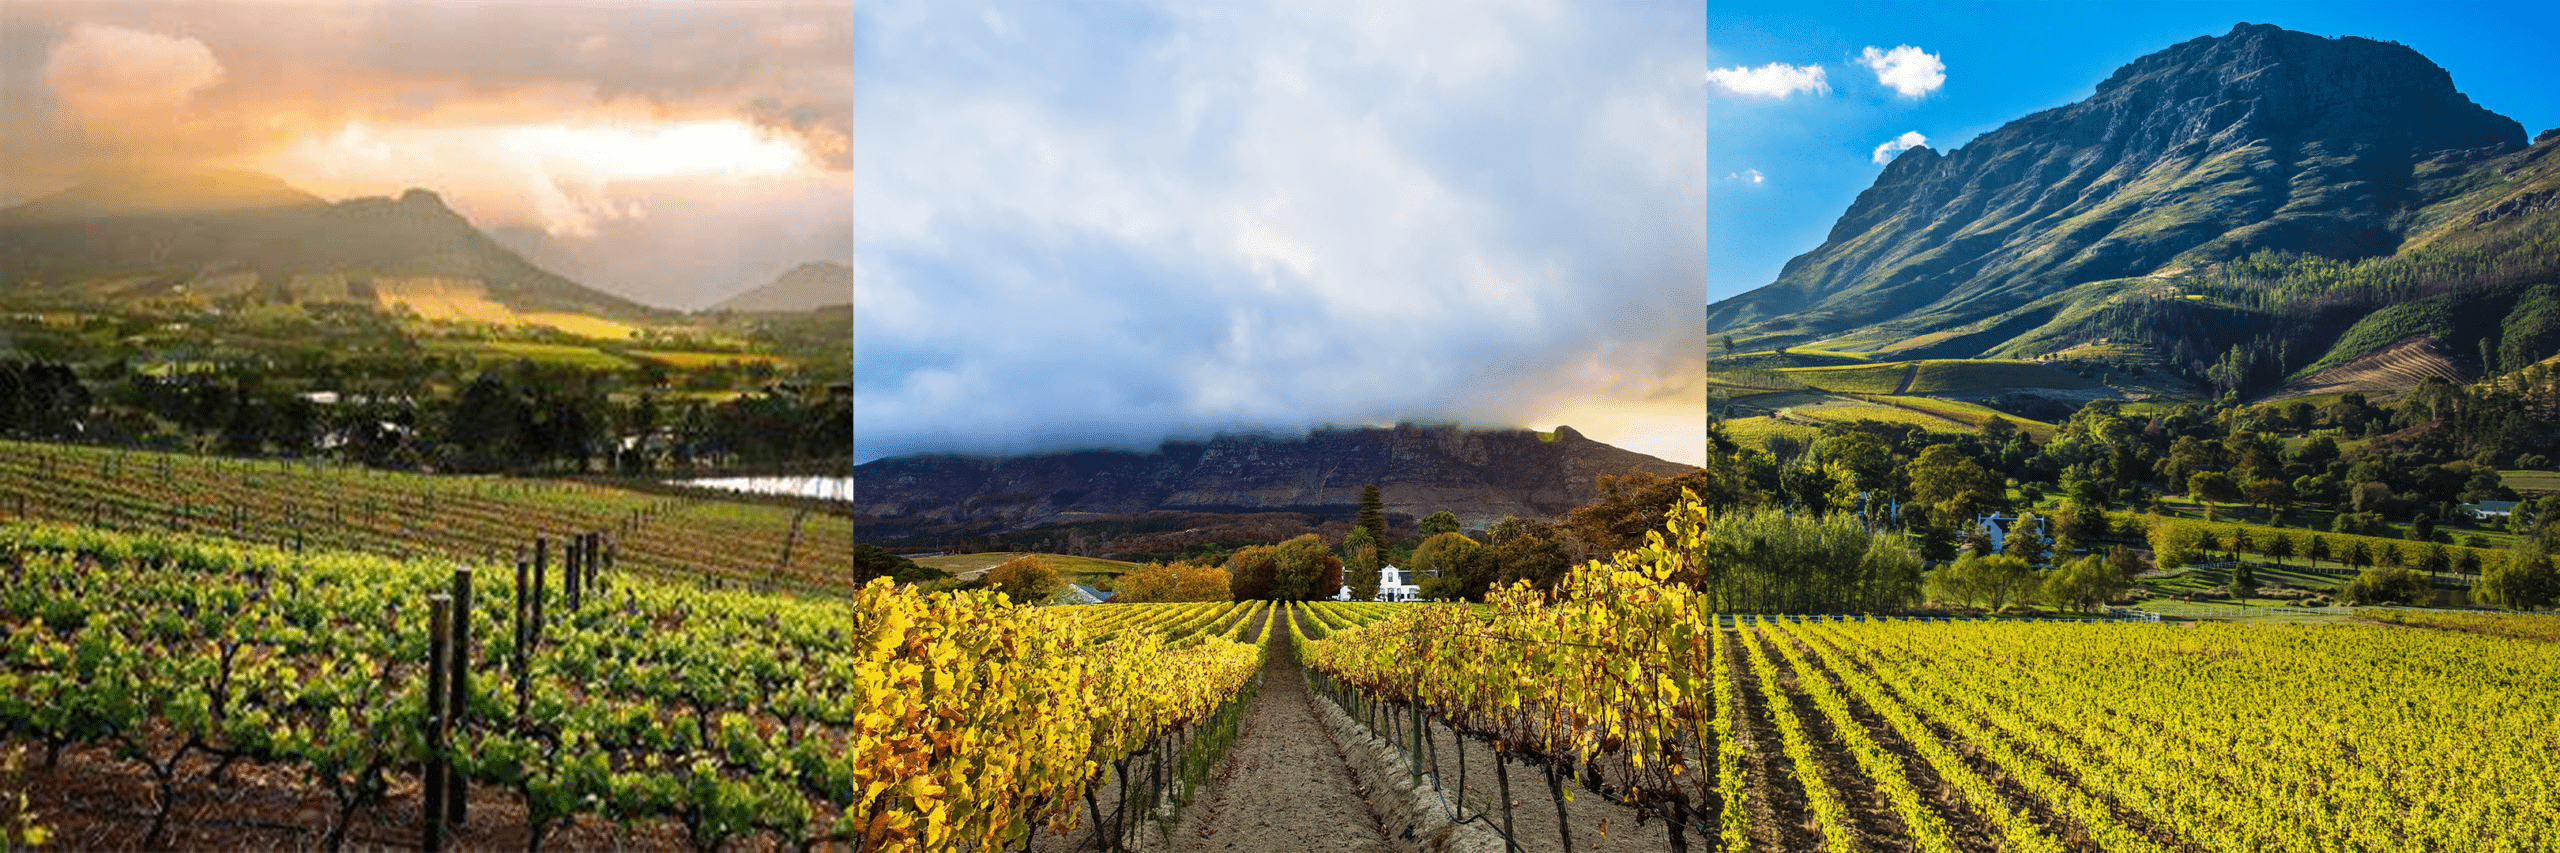 Gourmet Wine Tours of South Africa